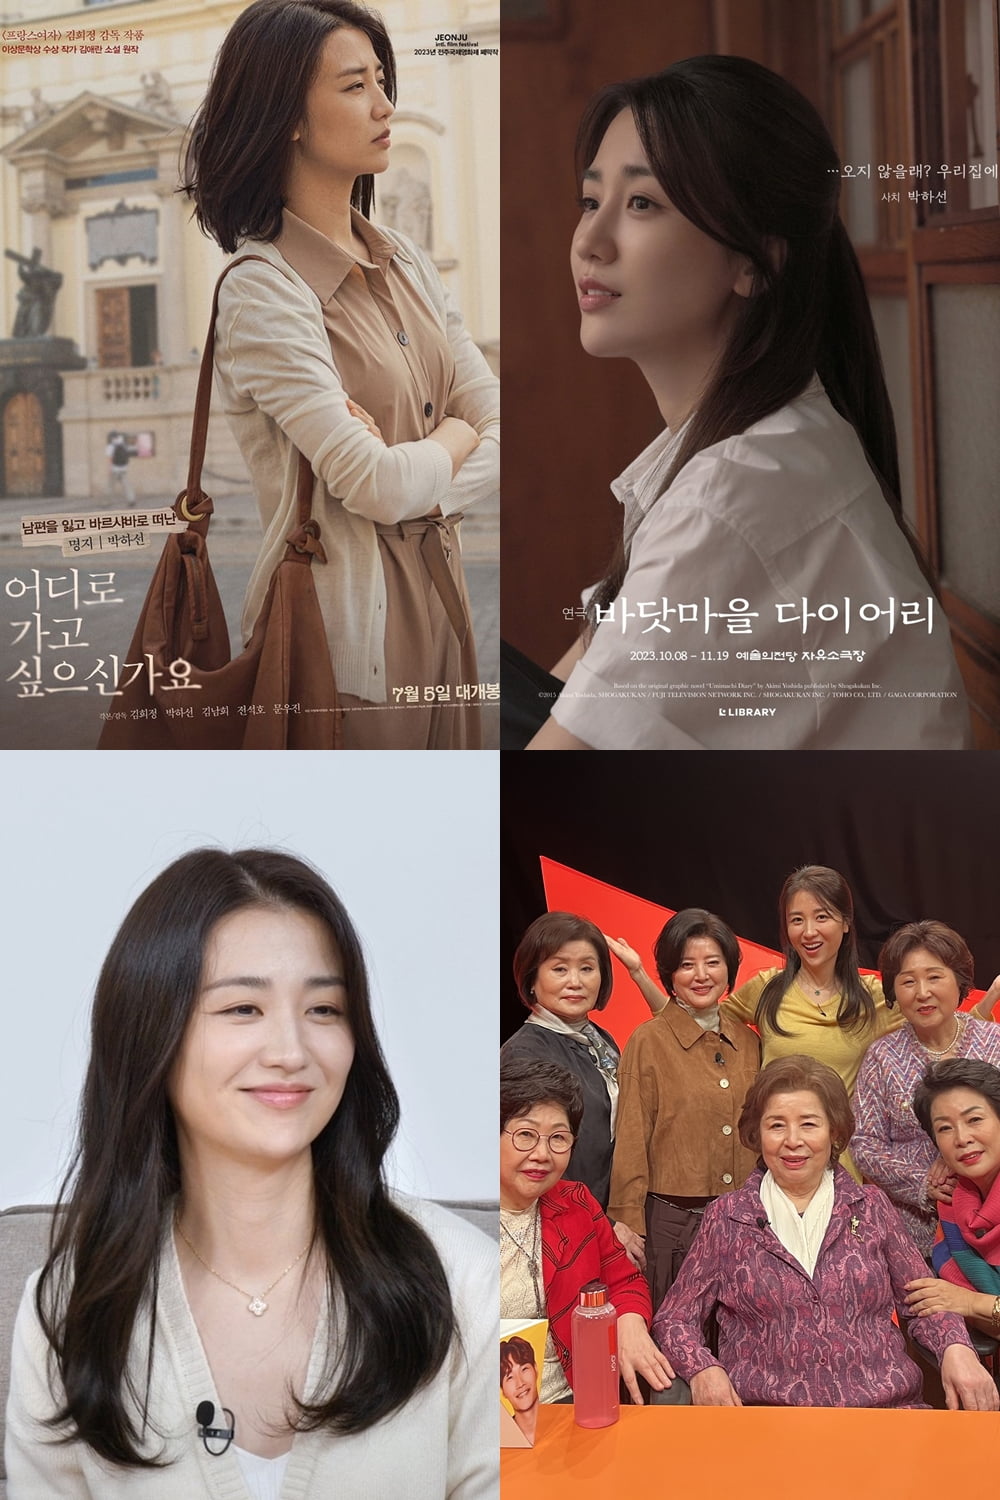 Park Ha-sun, from movies to dramas, entertainment, and plays... Busy, busy